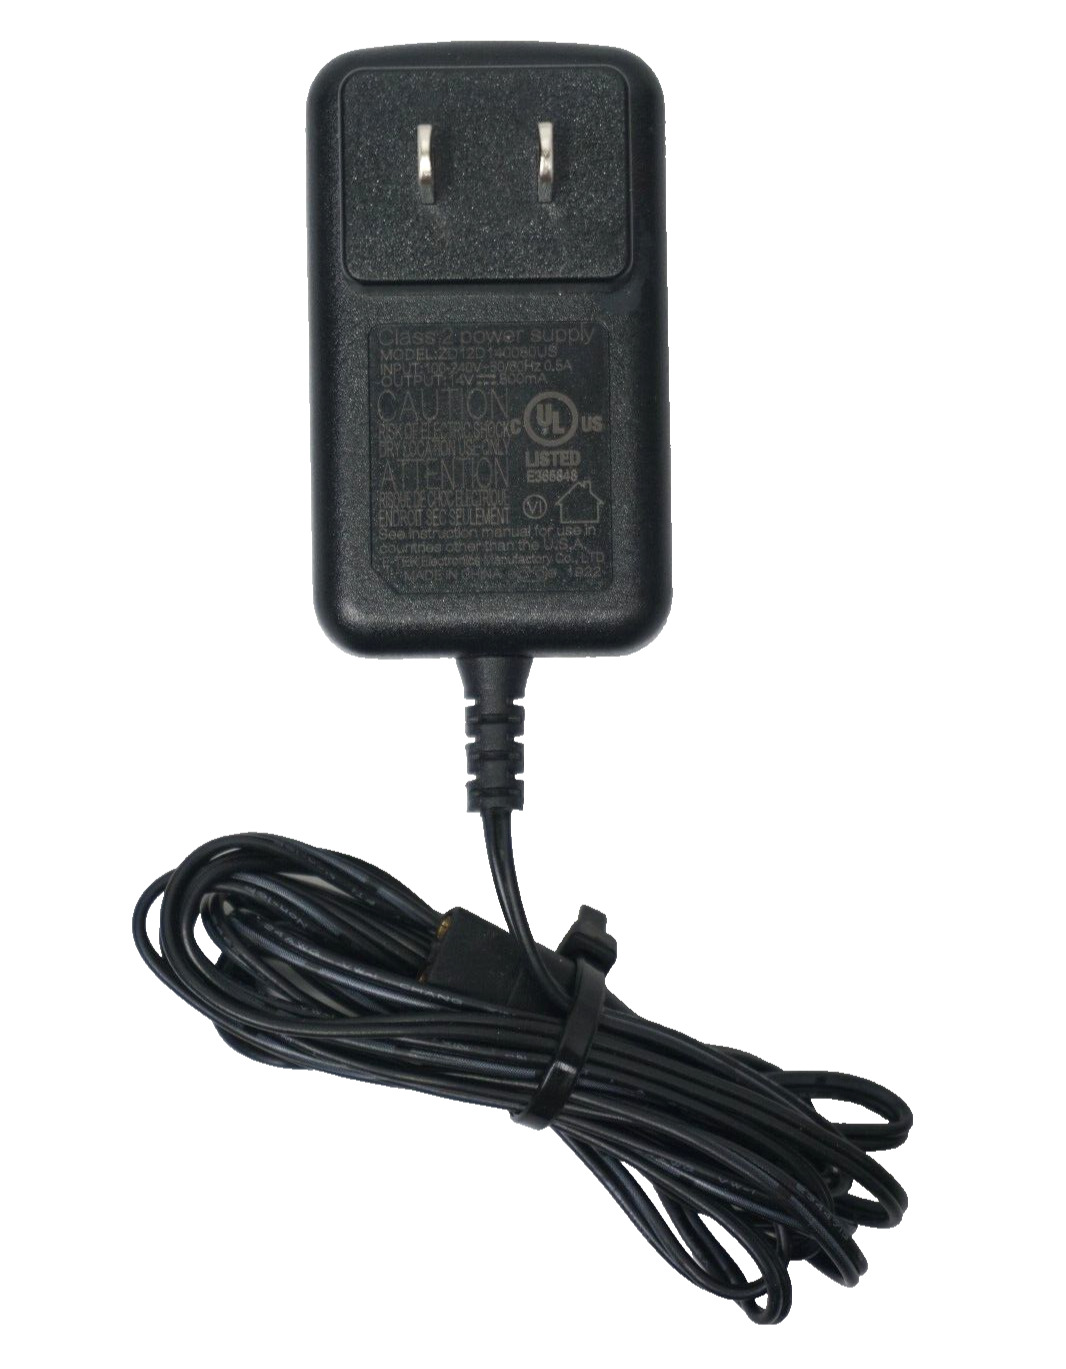 ⚡AC Adapter zd12d140080us For Bissell Featherweight Cordless Vacuum SHIPS TODAY